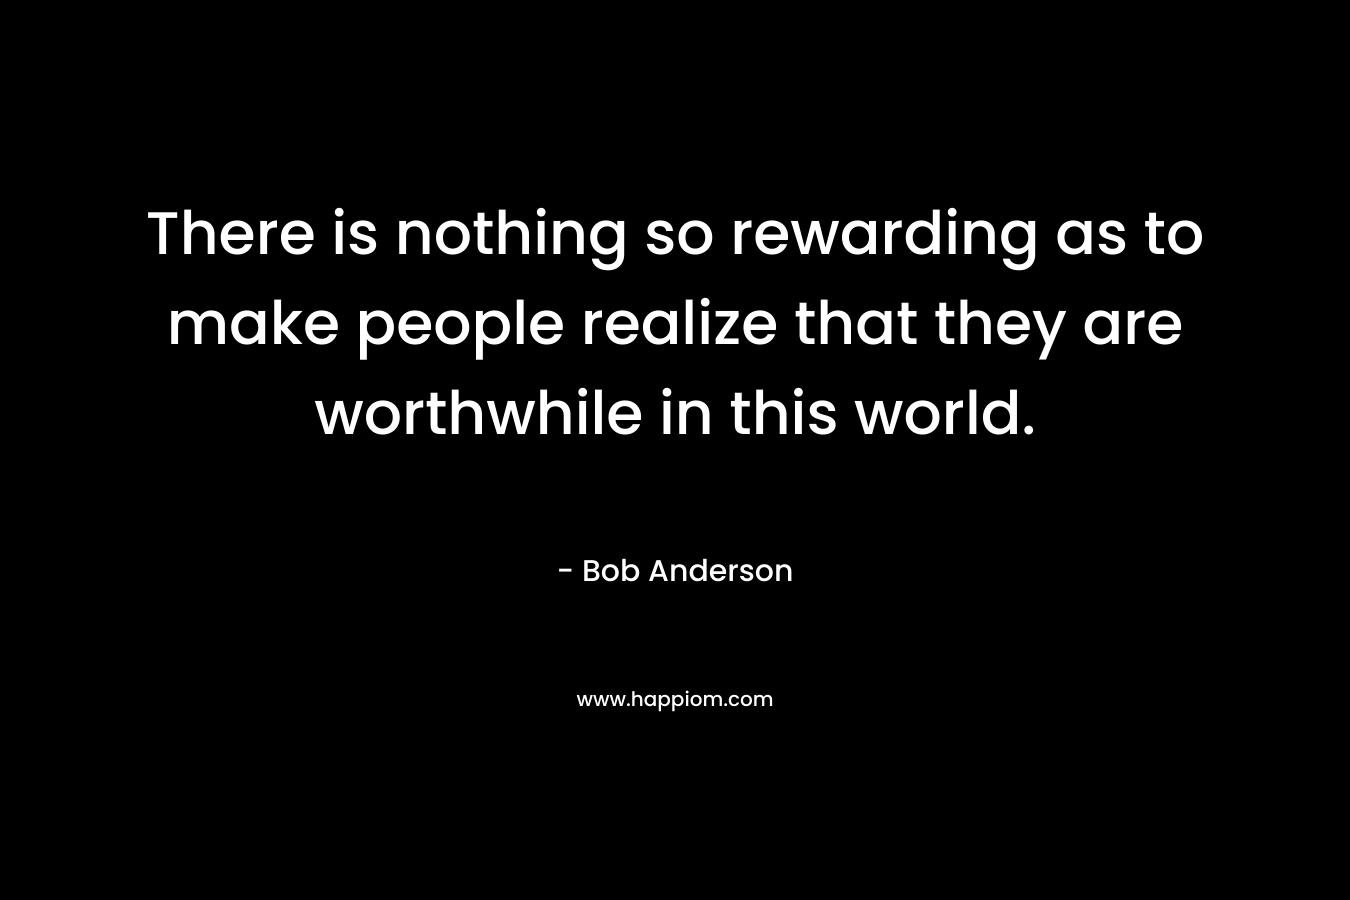 There is nothing so rewarding as to make people realize that they are worthwhile in this world.